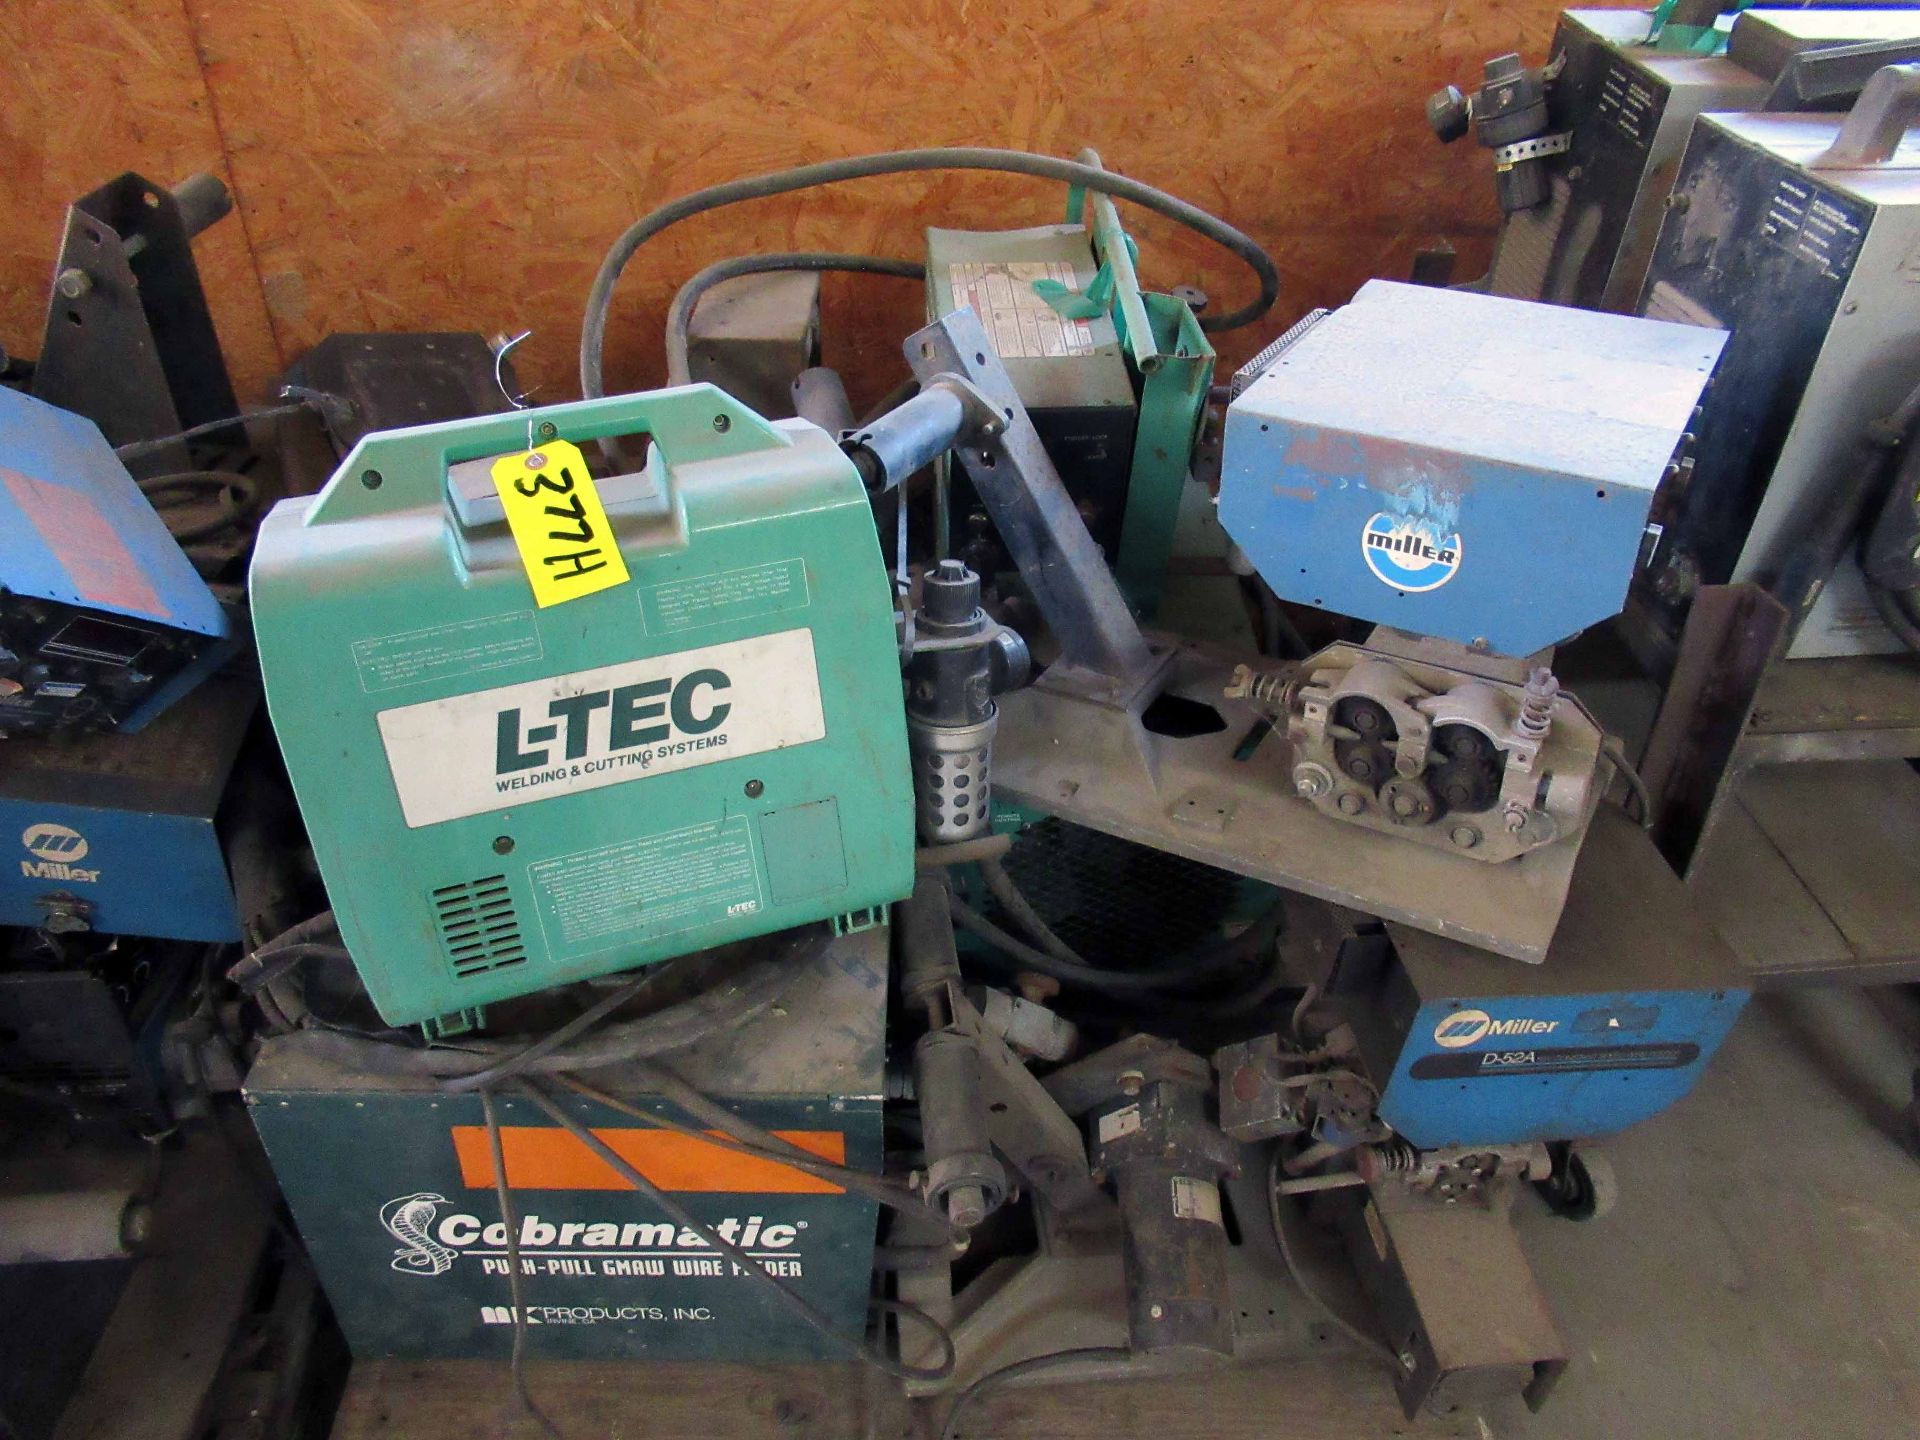 LOT OF WIRE FEEDERS (approx. 8) (on one pallet) (Located at: Precision Welding & Fabrication, 407